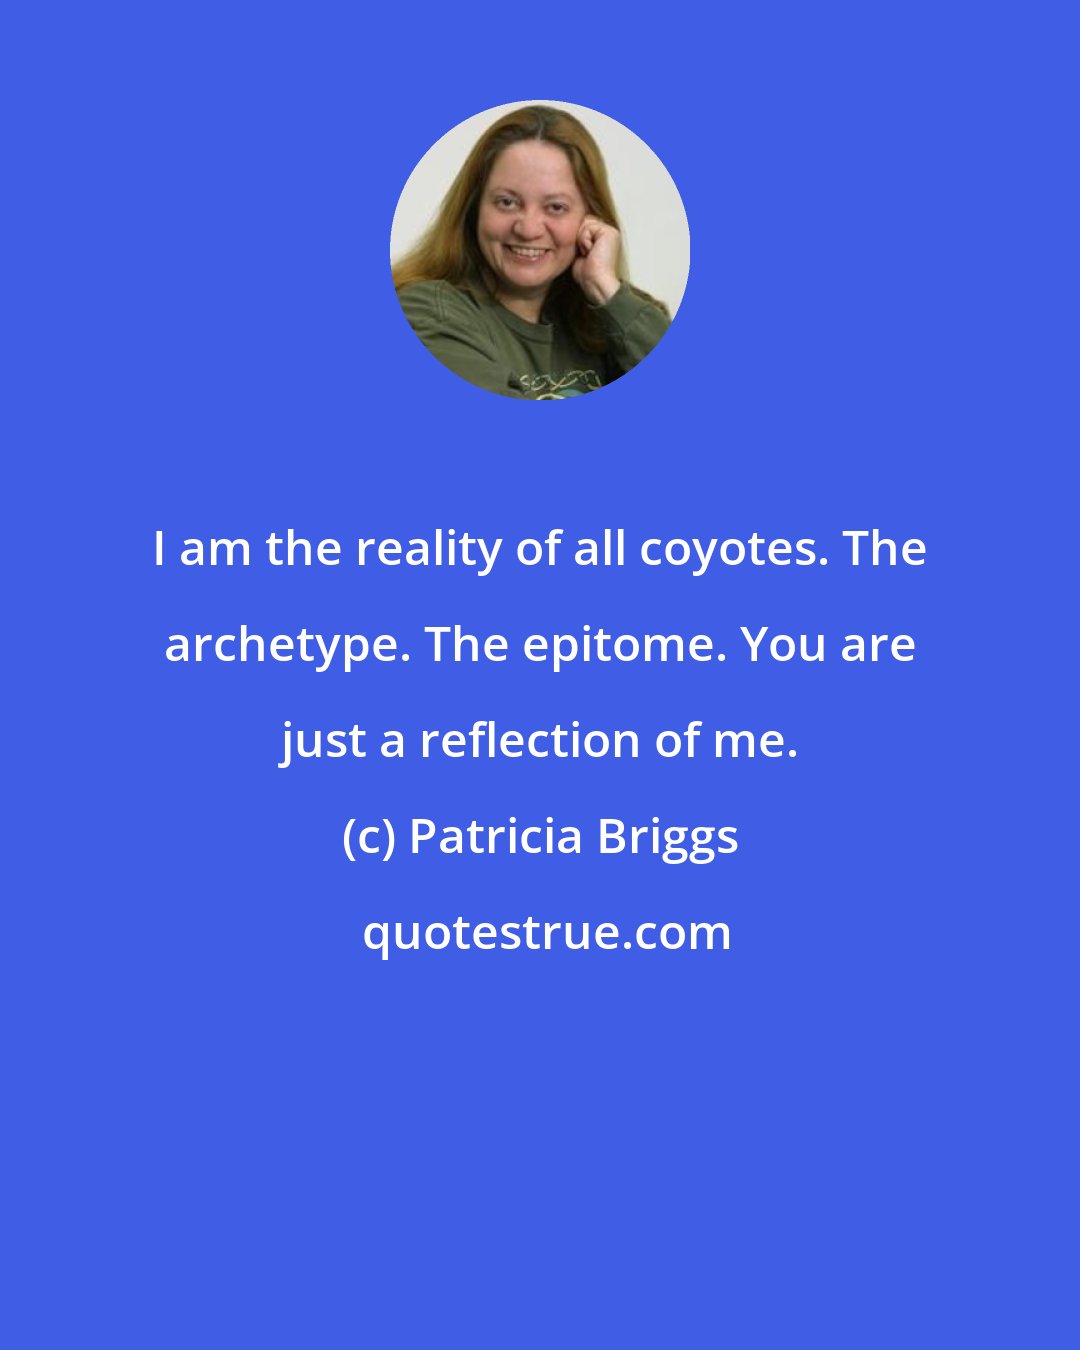 Patricia Briggs: I am the reality of all coyotes. The archetype. The epitome. You are just a reflection of me.